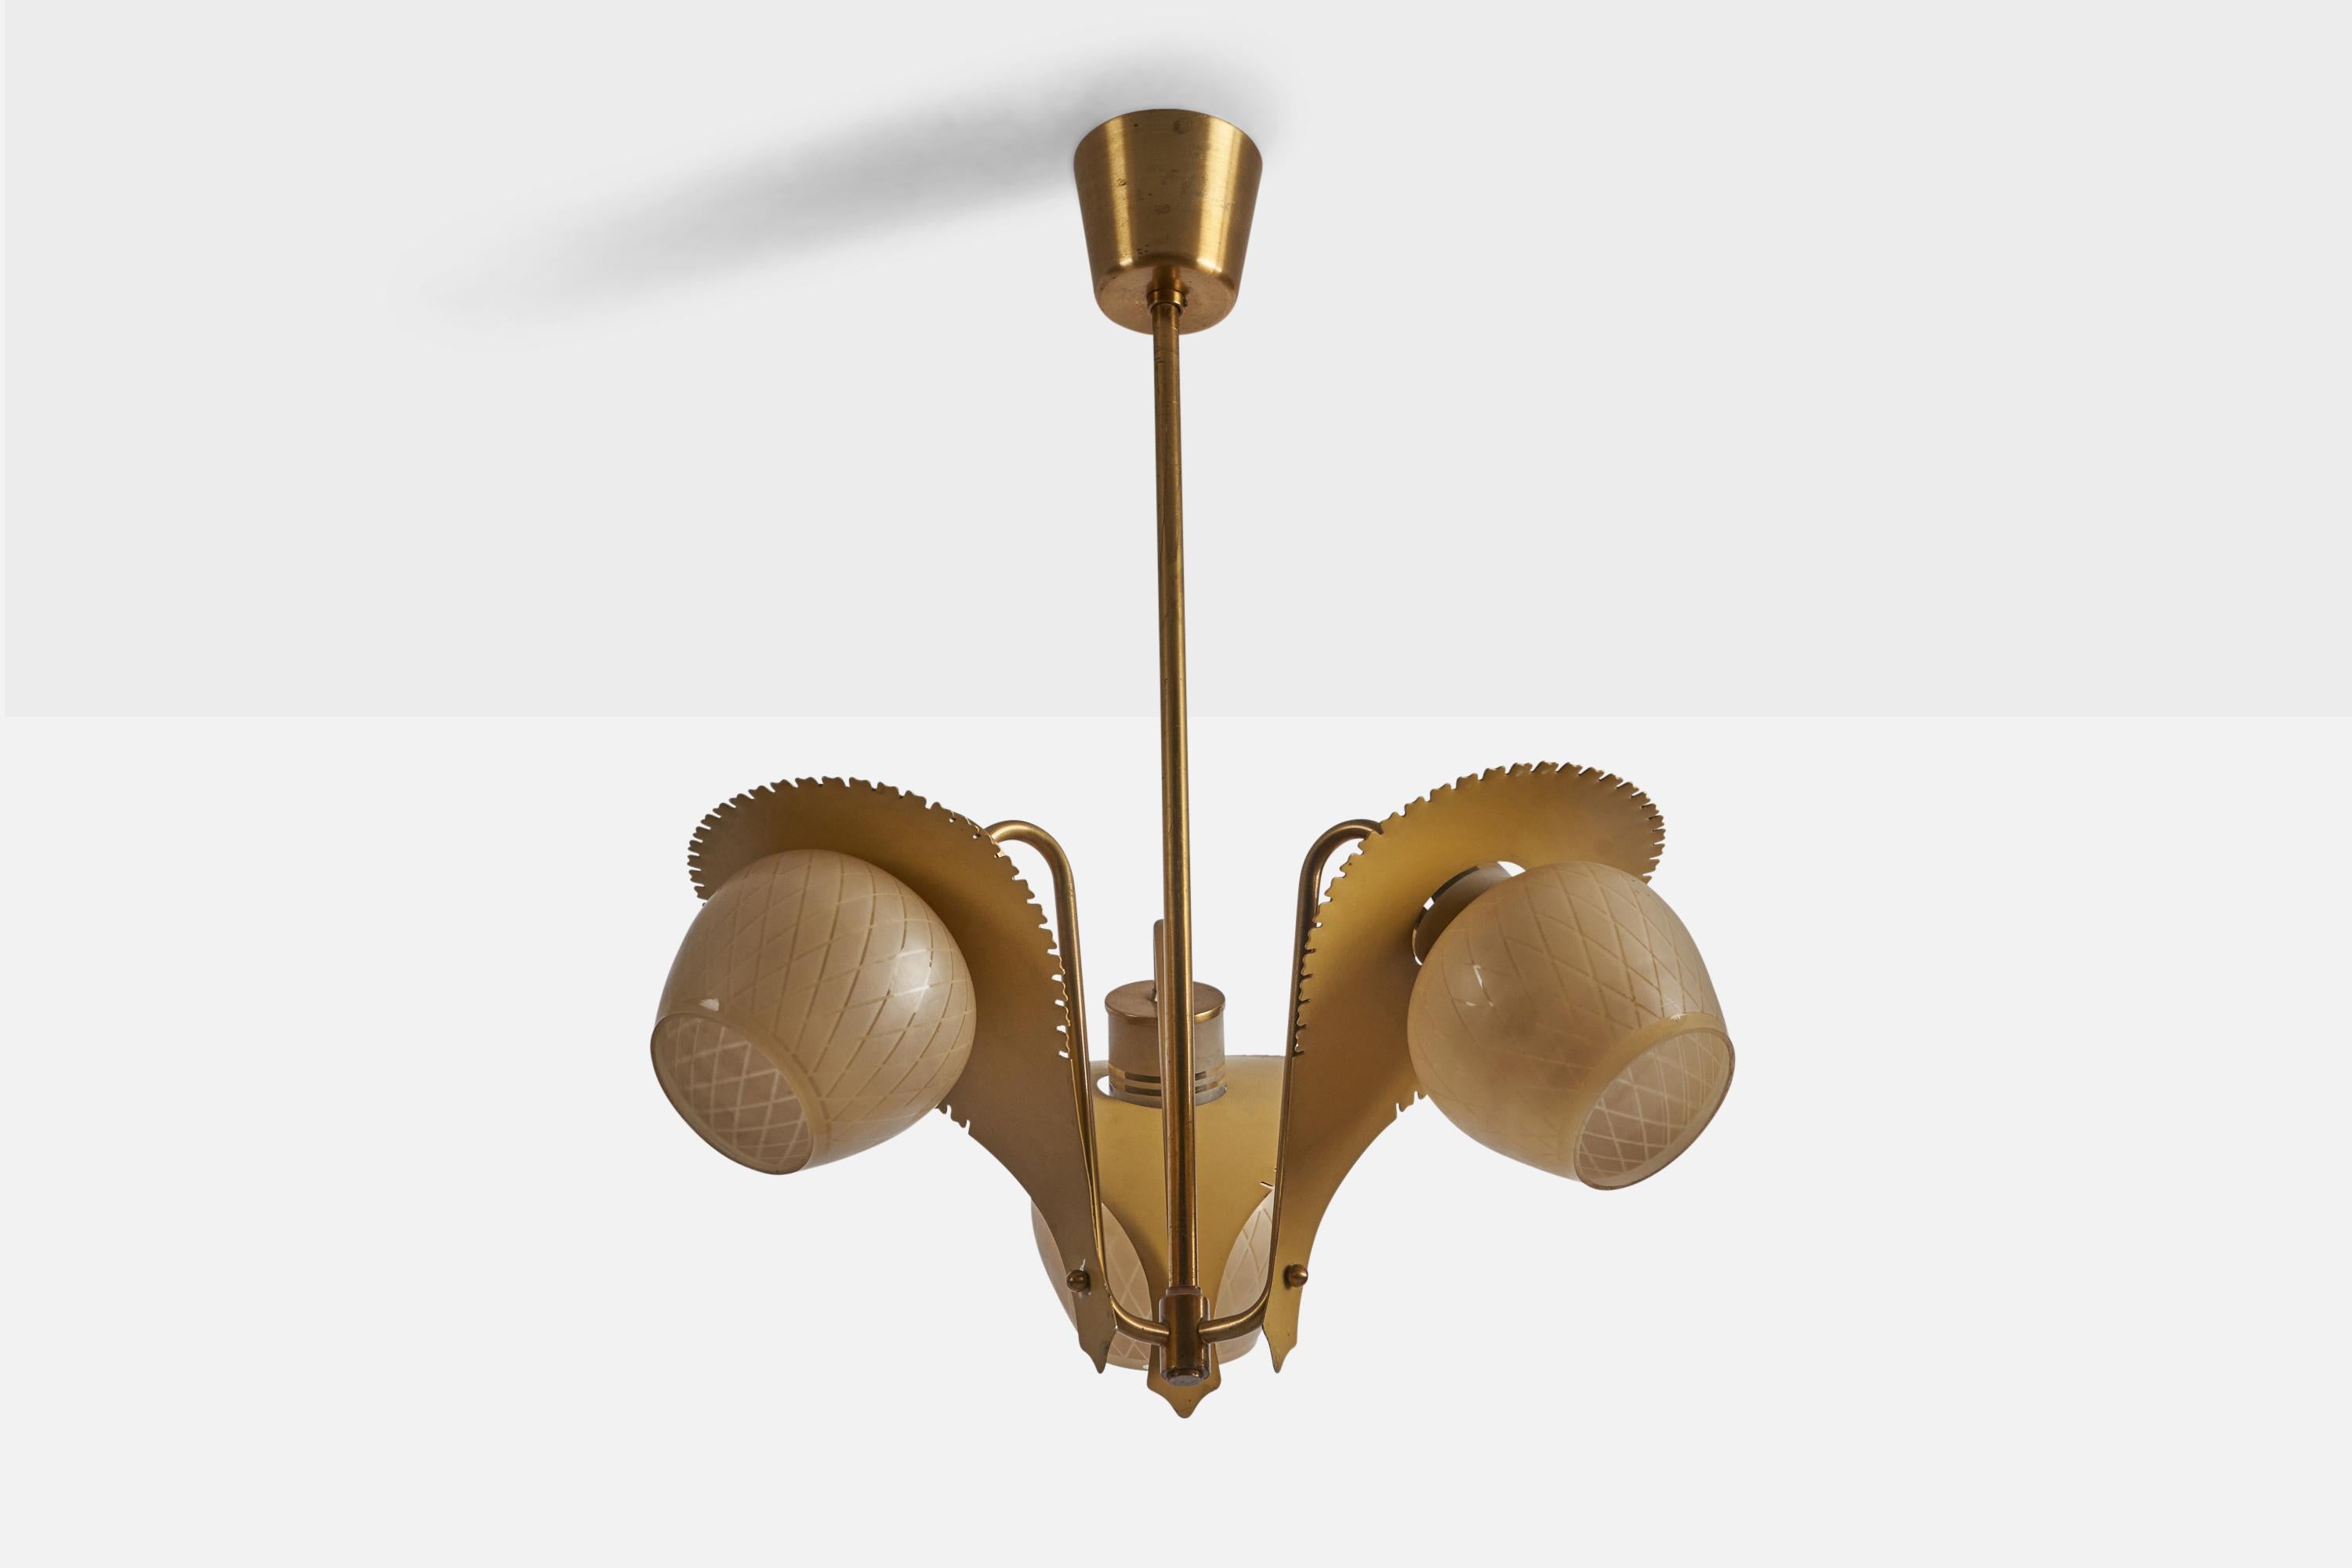 A brass, yellow lacquered metal and etched glass chandelier, design attributed to Bent Karlby and presumably produced by Lyfa, Denmark, c. 1950s.

Overall Dimensions (inches): 25” H x 18” Diameter
Bulb Specifications: E-26 Bulb
Number of Sockets: 3